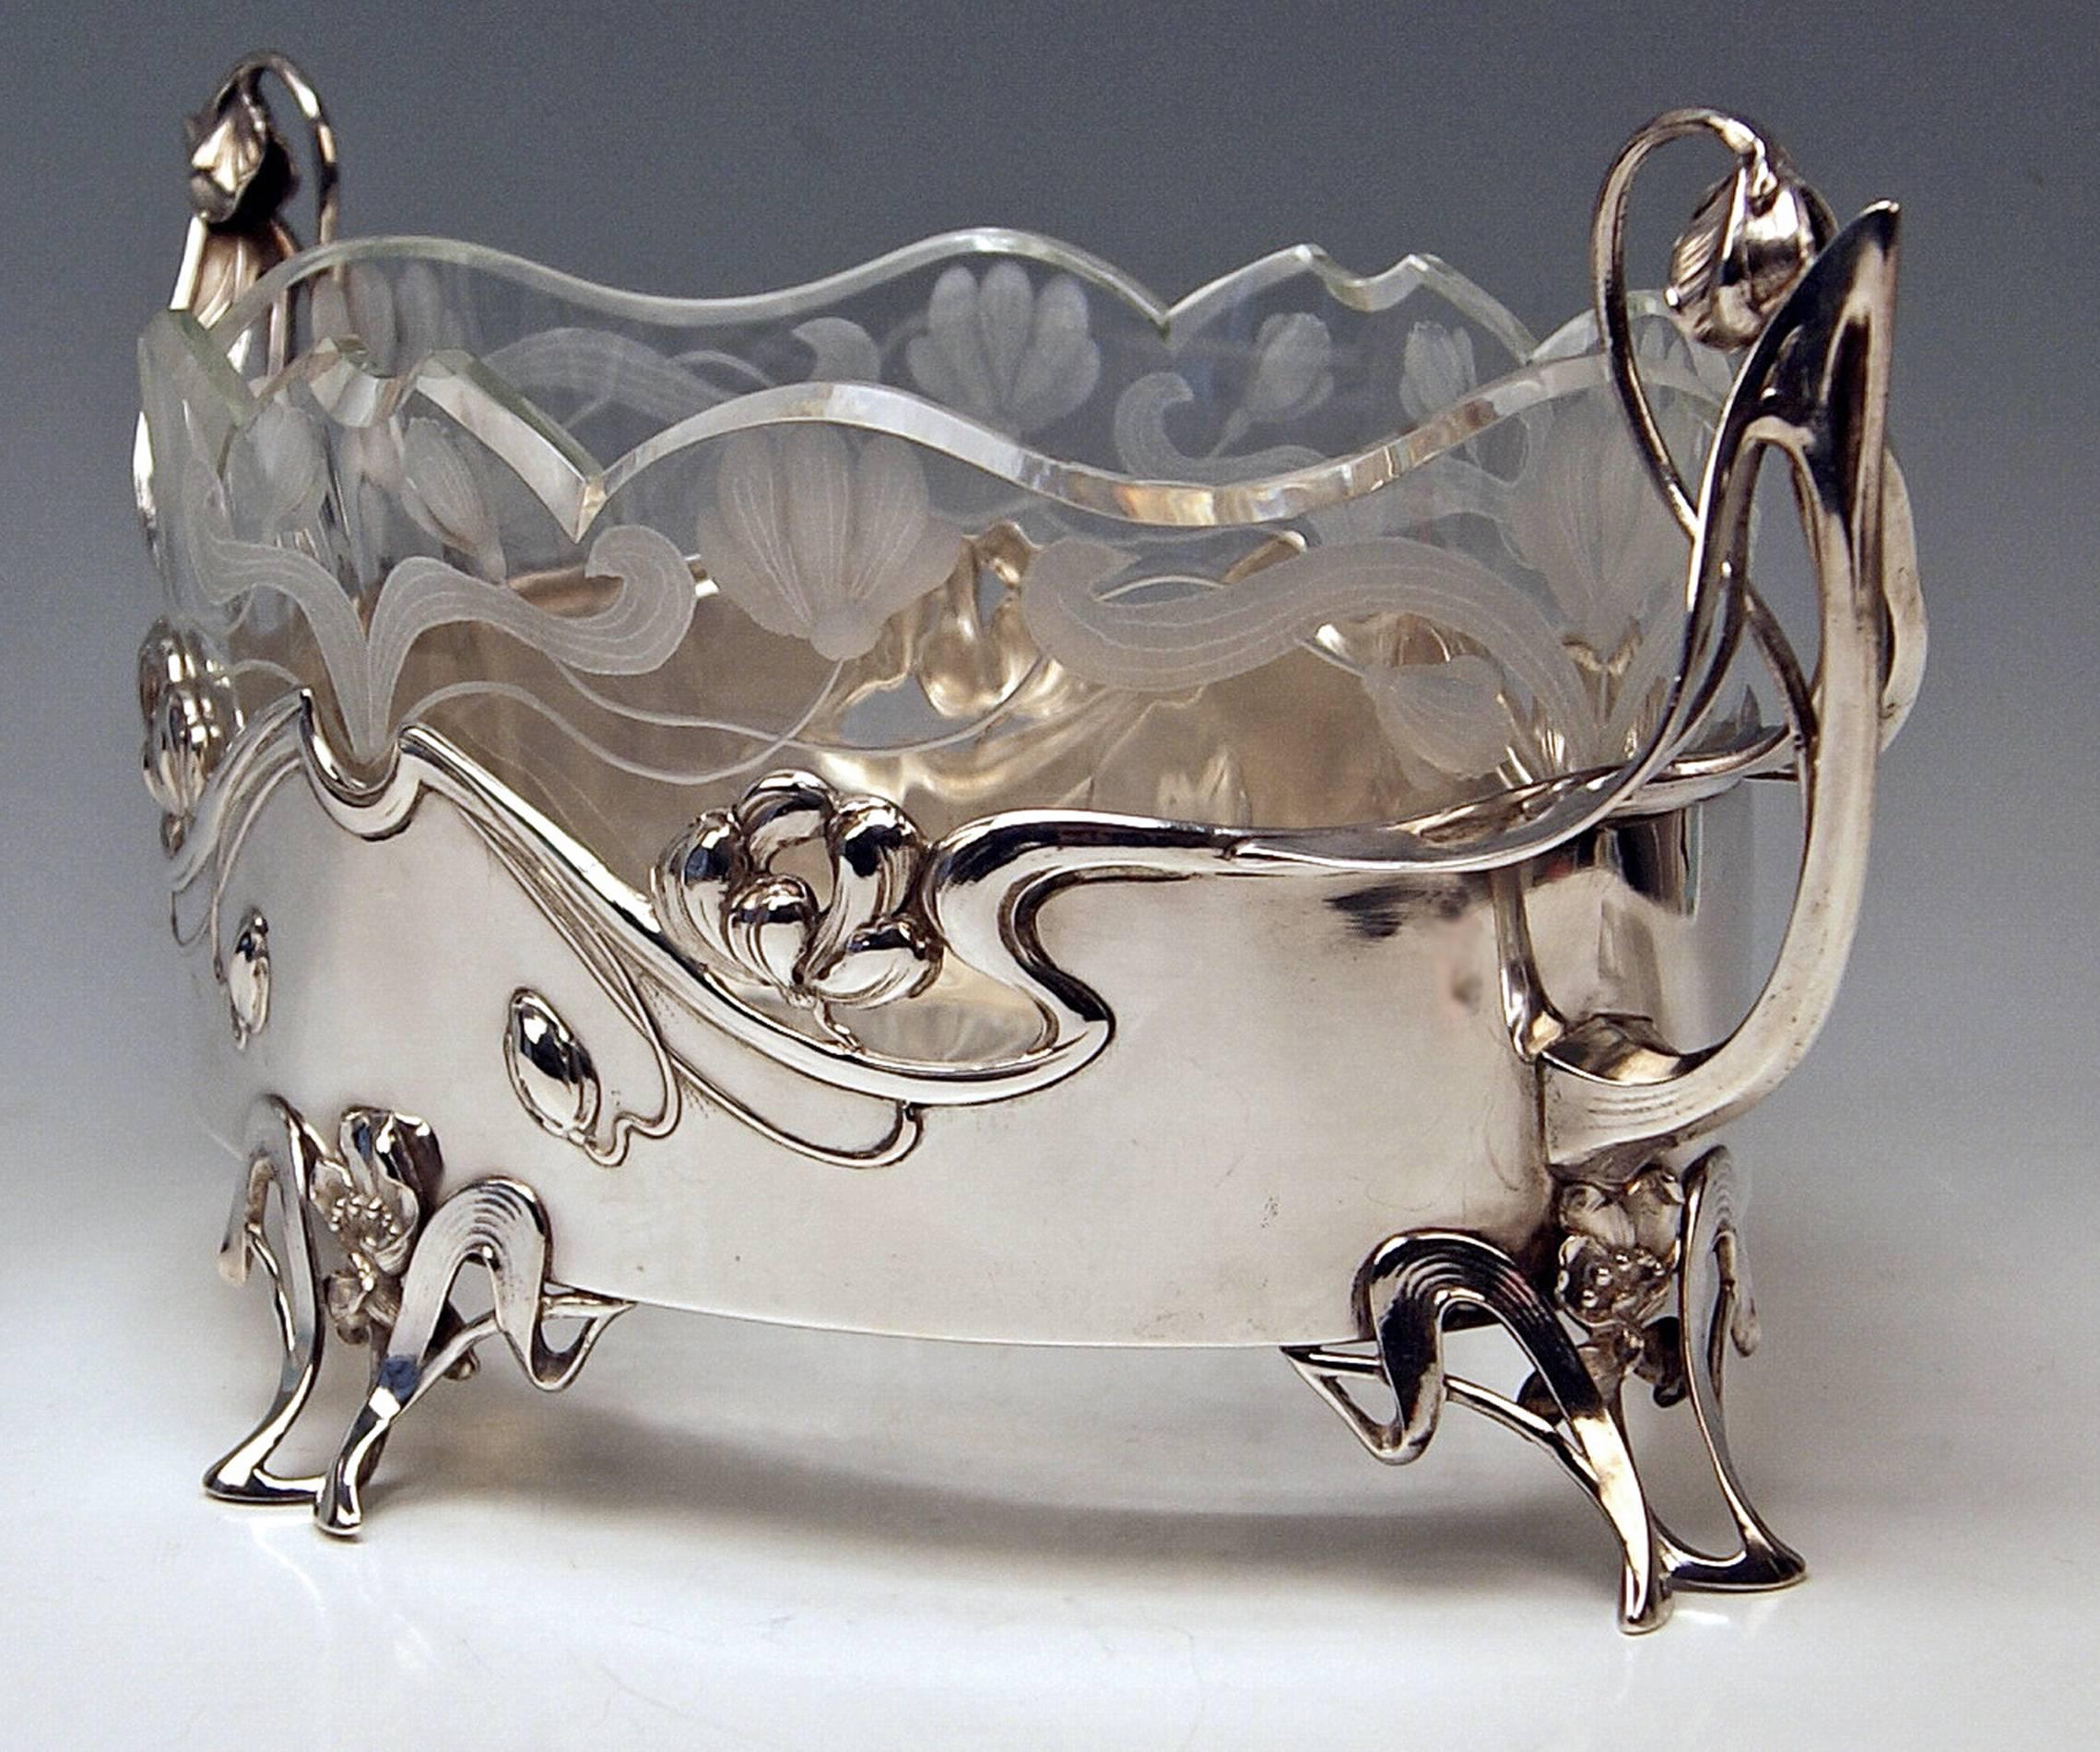 Stunning Art Nouveau large silver flower bowl / jardinière with original glass liner
Hallmarked (viennese silver) 
manufactured circa 1900

It is a finest large silver flower bowl (jardinière) with most elegant original glass liner. Referring to